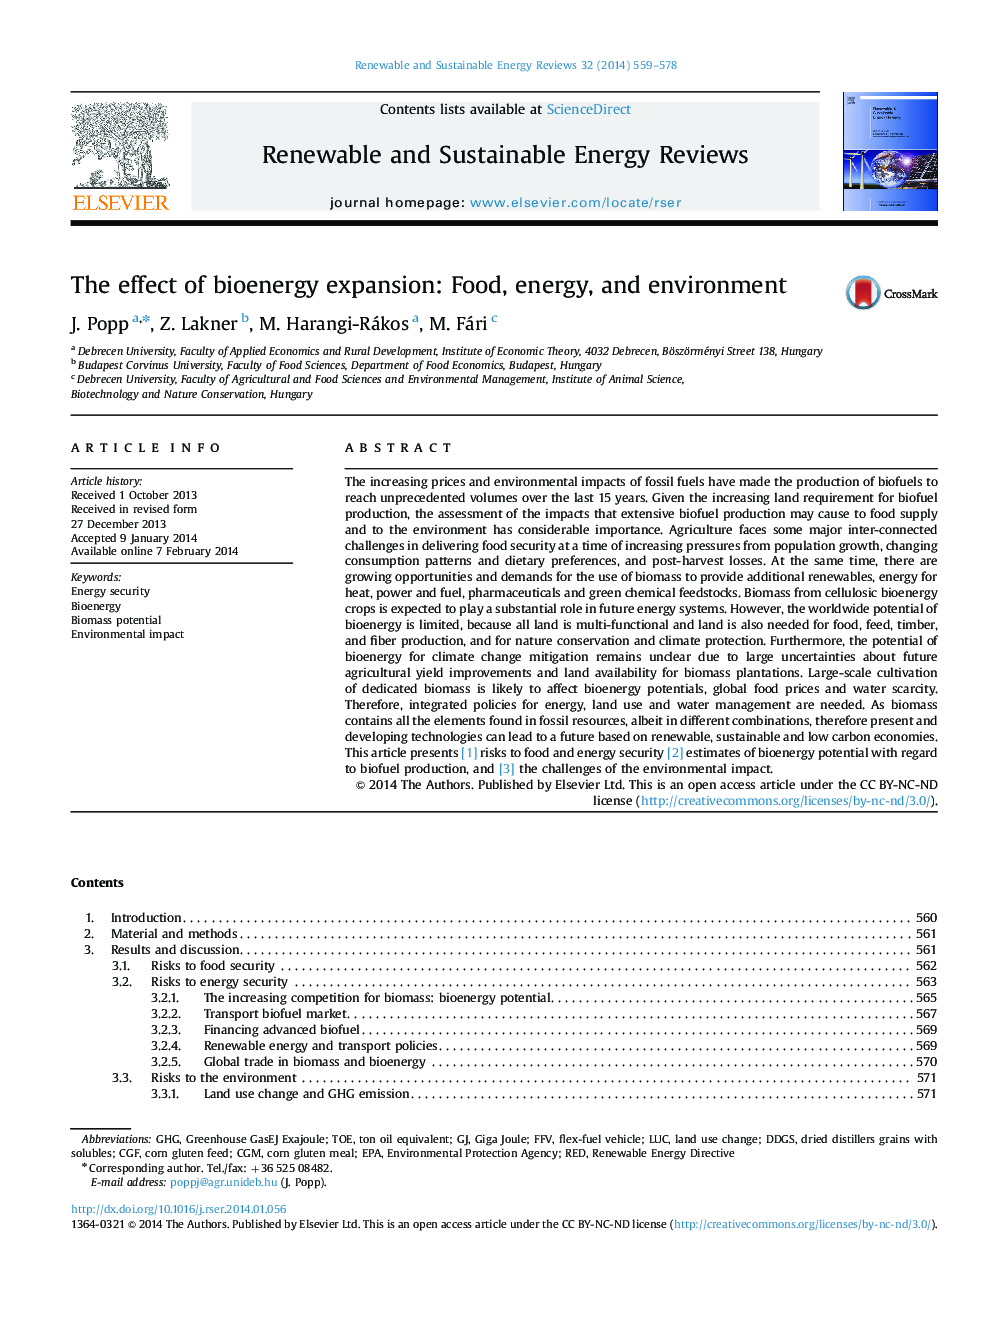 The effect of bioenergy expansion: Food, energy, and environment